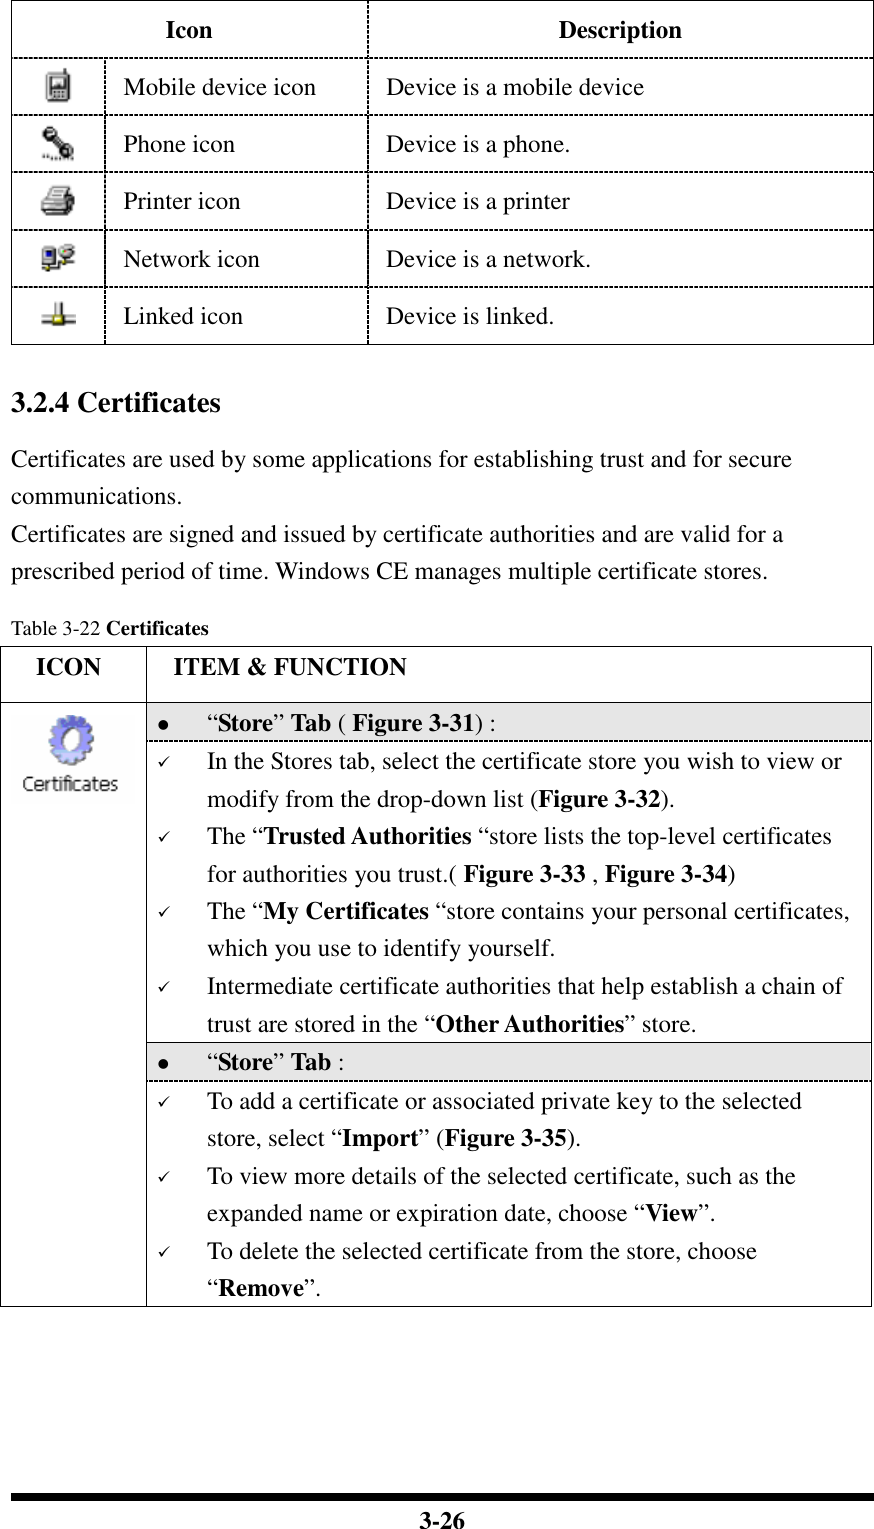  3-26 Icon Description  Mobile device icon  Device is a mobile device  Phone icon  Device is a phone.  Printer icon  Device is a printer  Network icon  Device is a network.  Linked icon  Device is linked.   3.2.4 Certificates  Certificates are used by some applications for establishing trust and for secure communications. Certificates are signed and issued by certificate authorities and are valid for a prescribed period of time. Windows CE manages multiple certificate stores.  Table 3-22 Certificates     ICON  ITEM &amp; FUNCTION  “Store” Tab ( Figure 3-31) :   In the Stores tab, select the certificate store you wish to view or modify from the drop-down list (Figure 3-32).   The “Trusted Authorities “store lists the top-level certificates for authorities you trust.( Figure 3-33 , Figure 3-34)   The “My Certificates “store contains your personal certificates, which you use to identify yourself.   Intermediate certificate authorities that help establish a chain of trust are stored in the “Other Authorities” store.  “Store” Tab :    To add a certificate or associated private key to the selected store, select “Import” (Figure 3-35).  To view more details of the selected certificate, such as the expanded name or expiration date, choose “View”.  To delete the selected certificate from the store, choose “Remove”.   